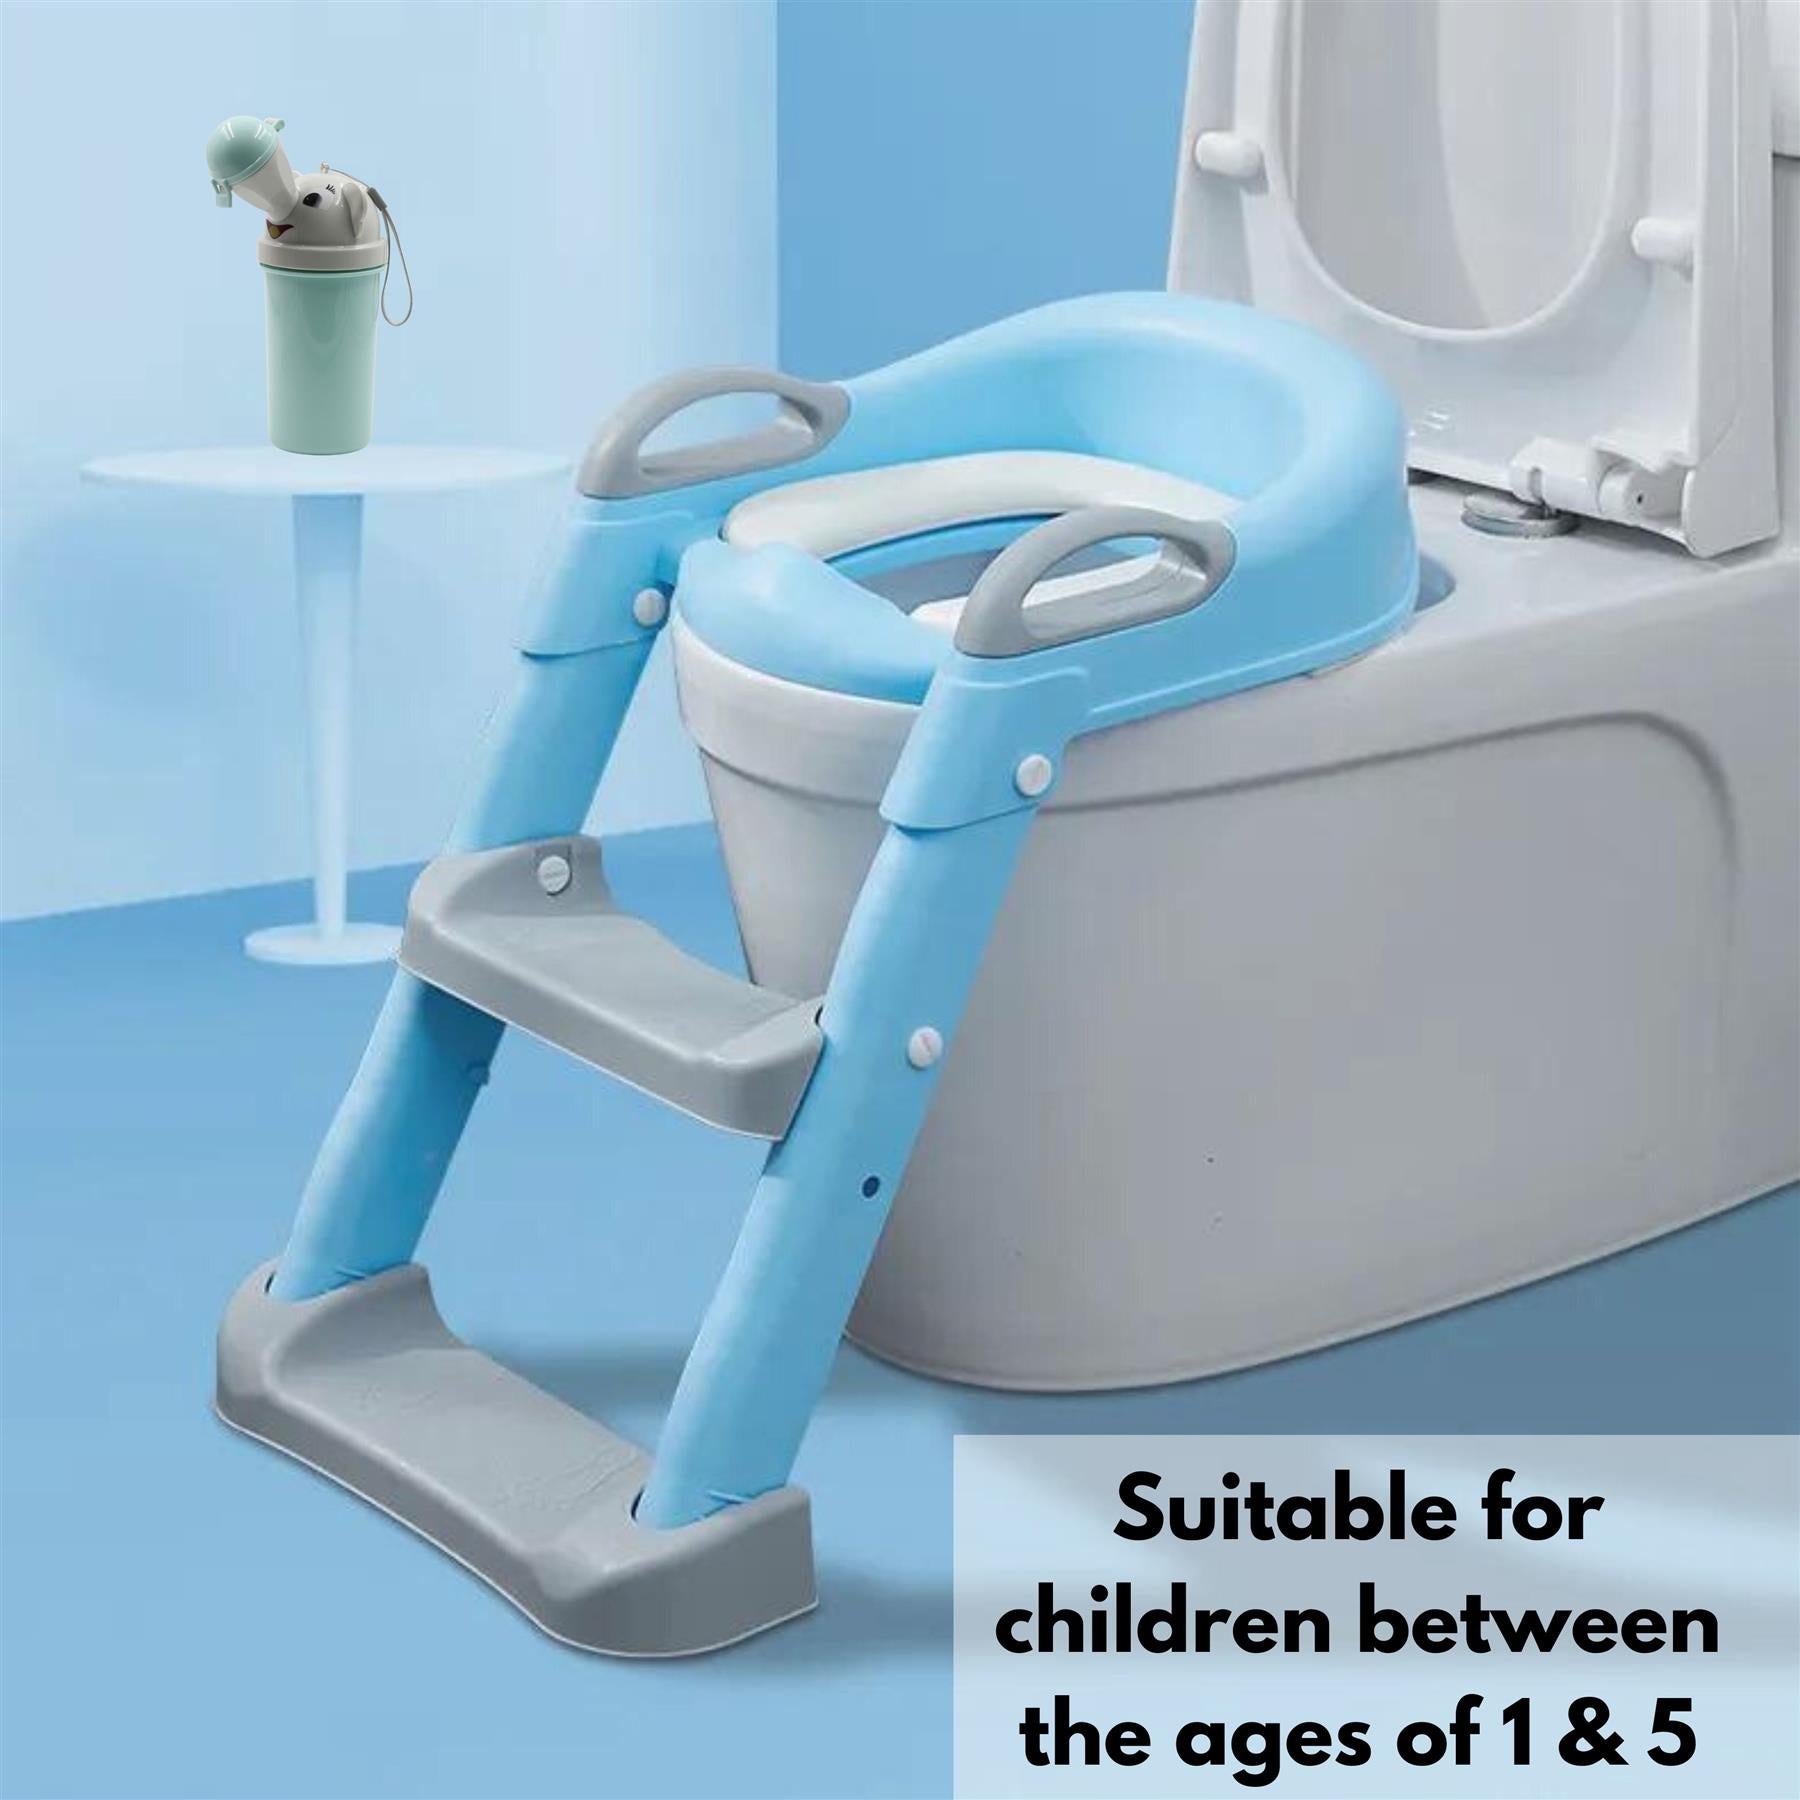 Foldable Toilet Potty Training Set For Kids - Toilet Seat Step Stool Potty Chair And Emergency Toilet Portable Seat - Perfect for Home and Travel - Set of 2